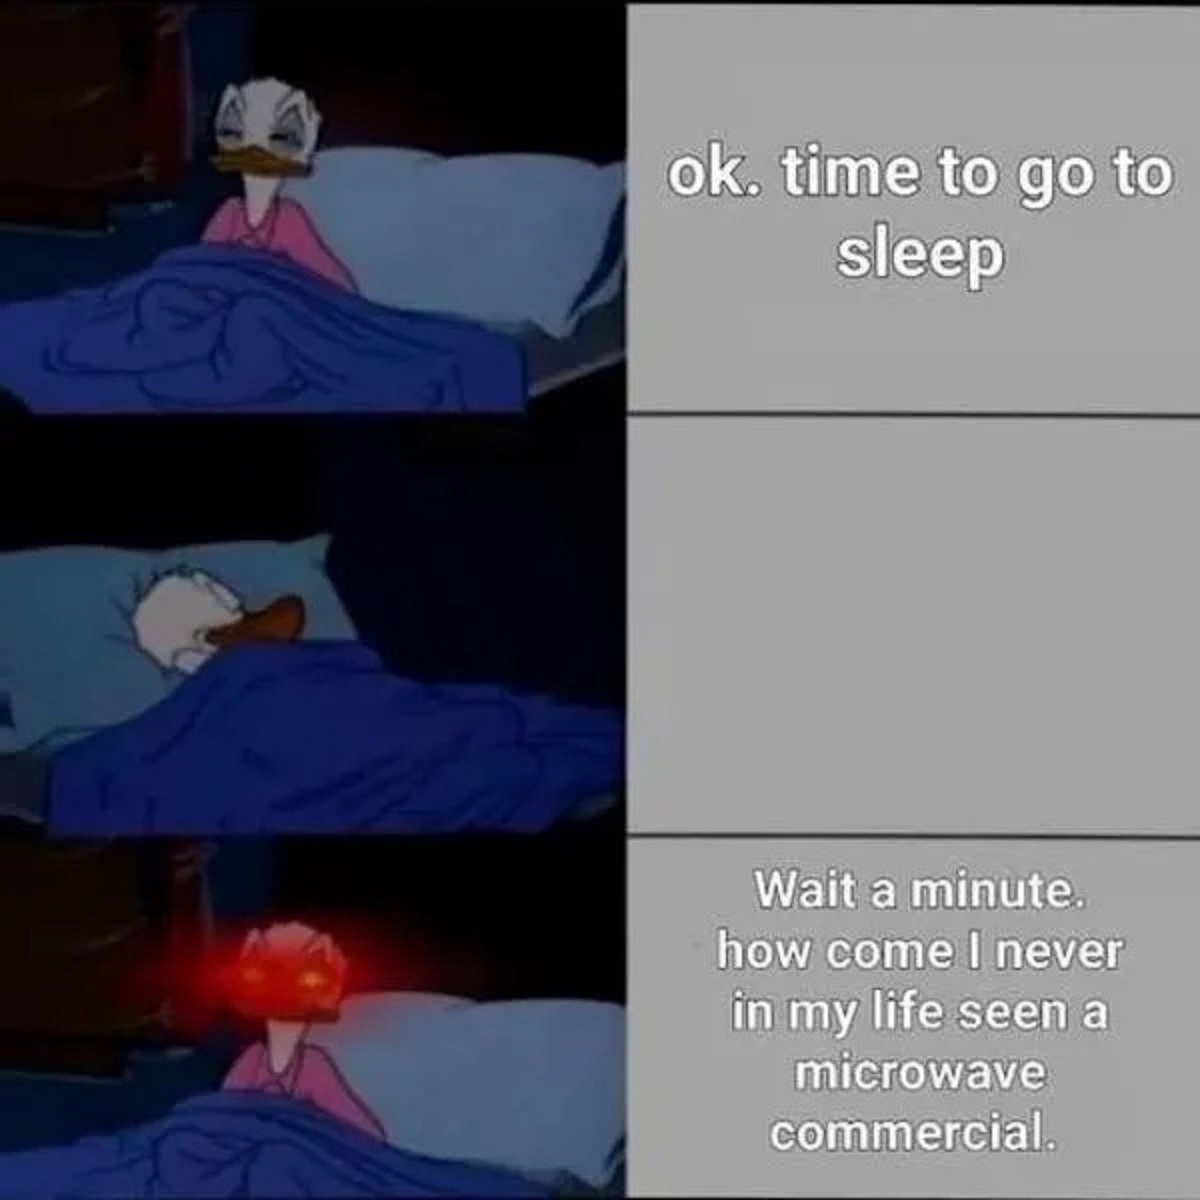 time to go to sleep meme - 3 ok. time to go to sleep Wait a minute. how come I never in my life seen a microwave commercial.